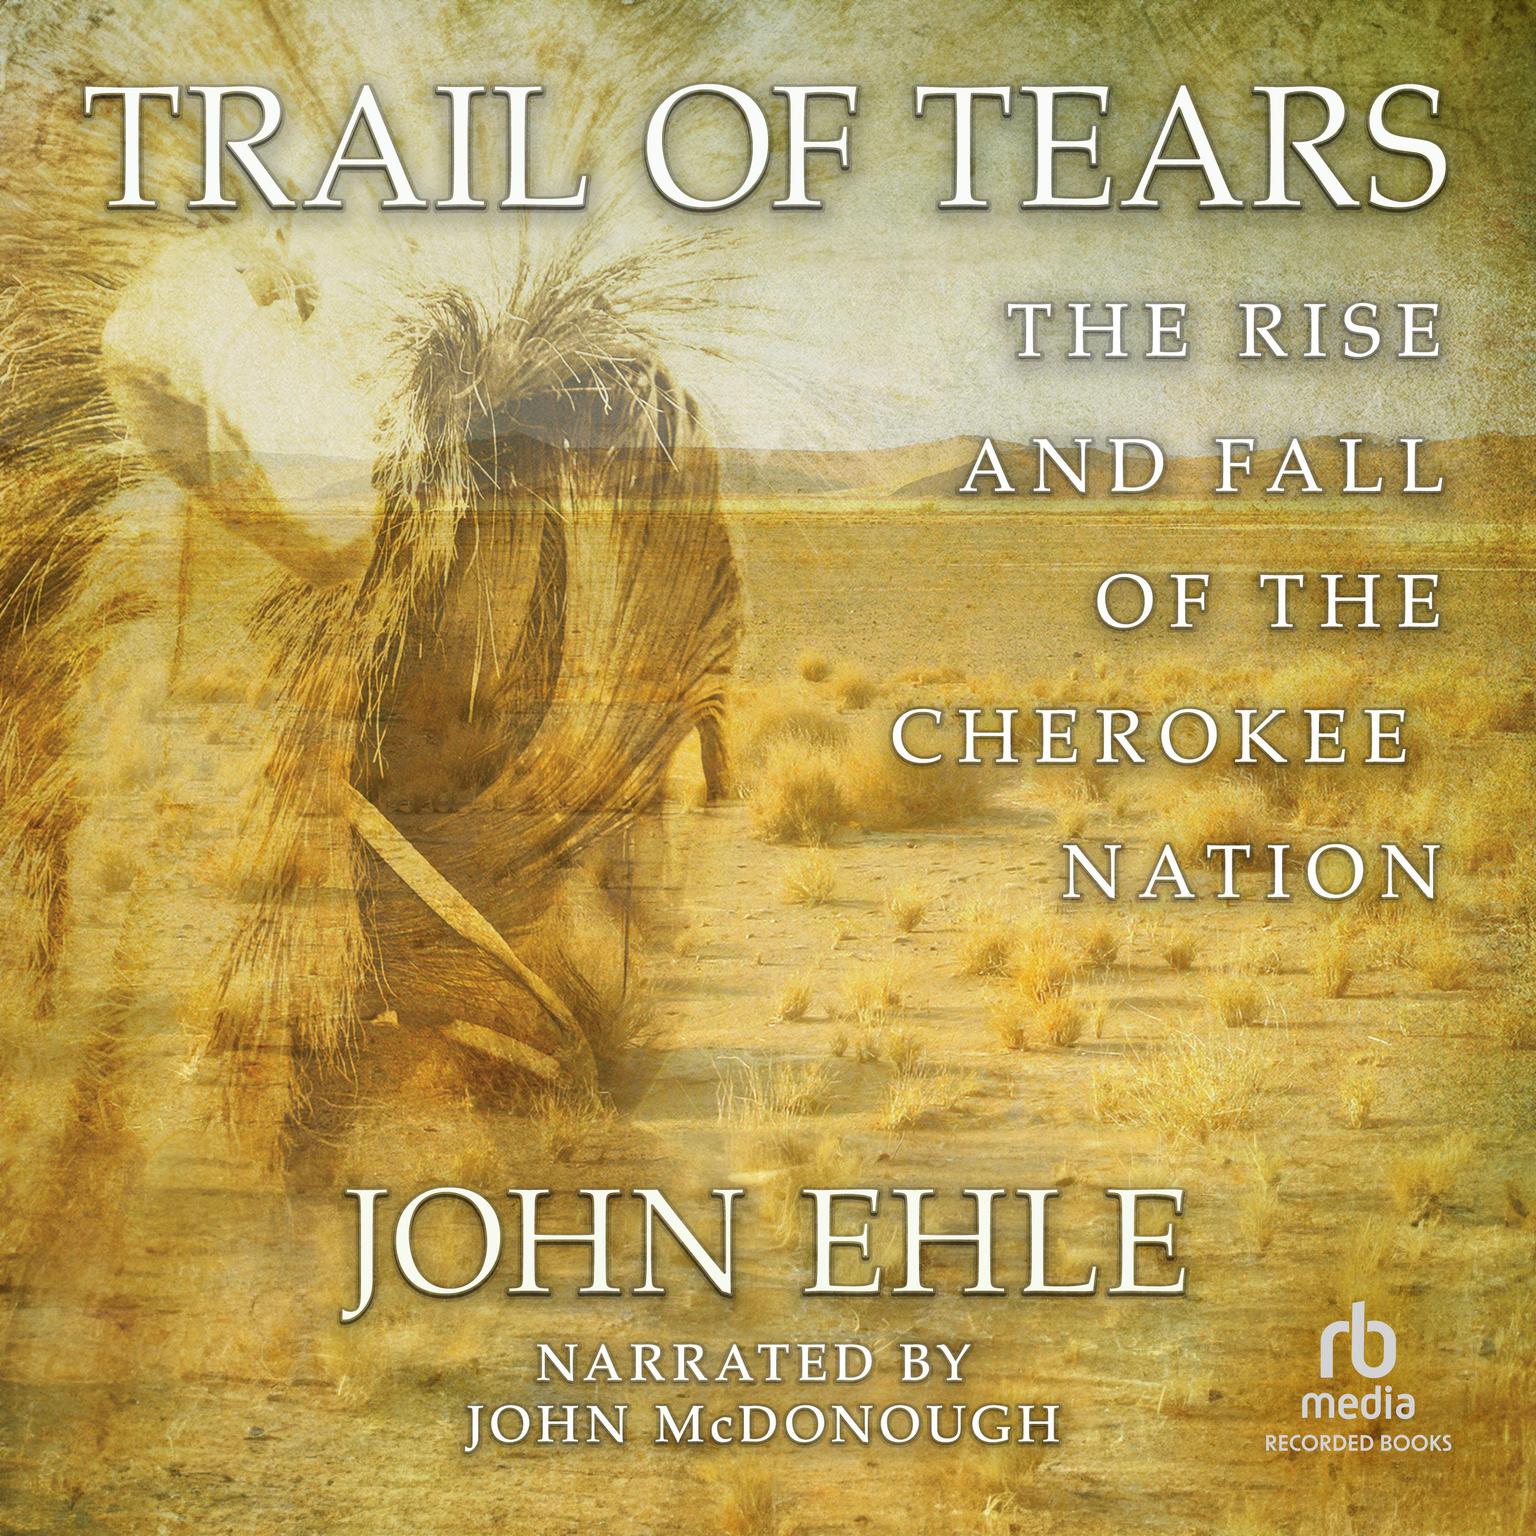 Trail of Tears: The Rise and Fall of the Cherokee Nation Audiobook, by John Ehle